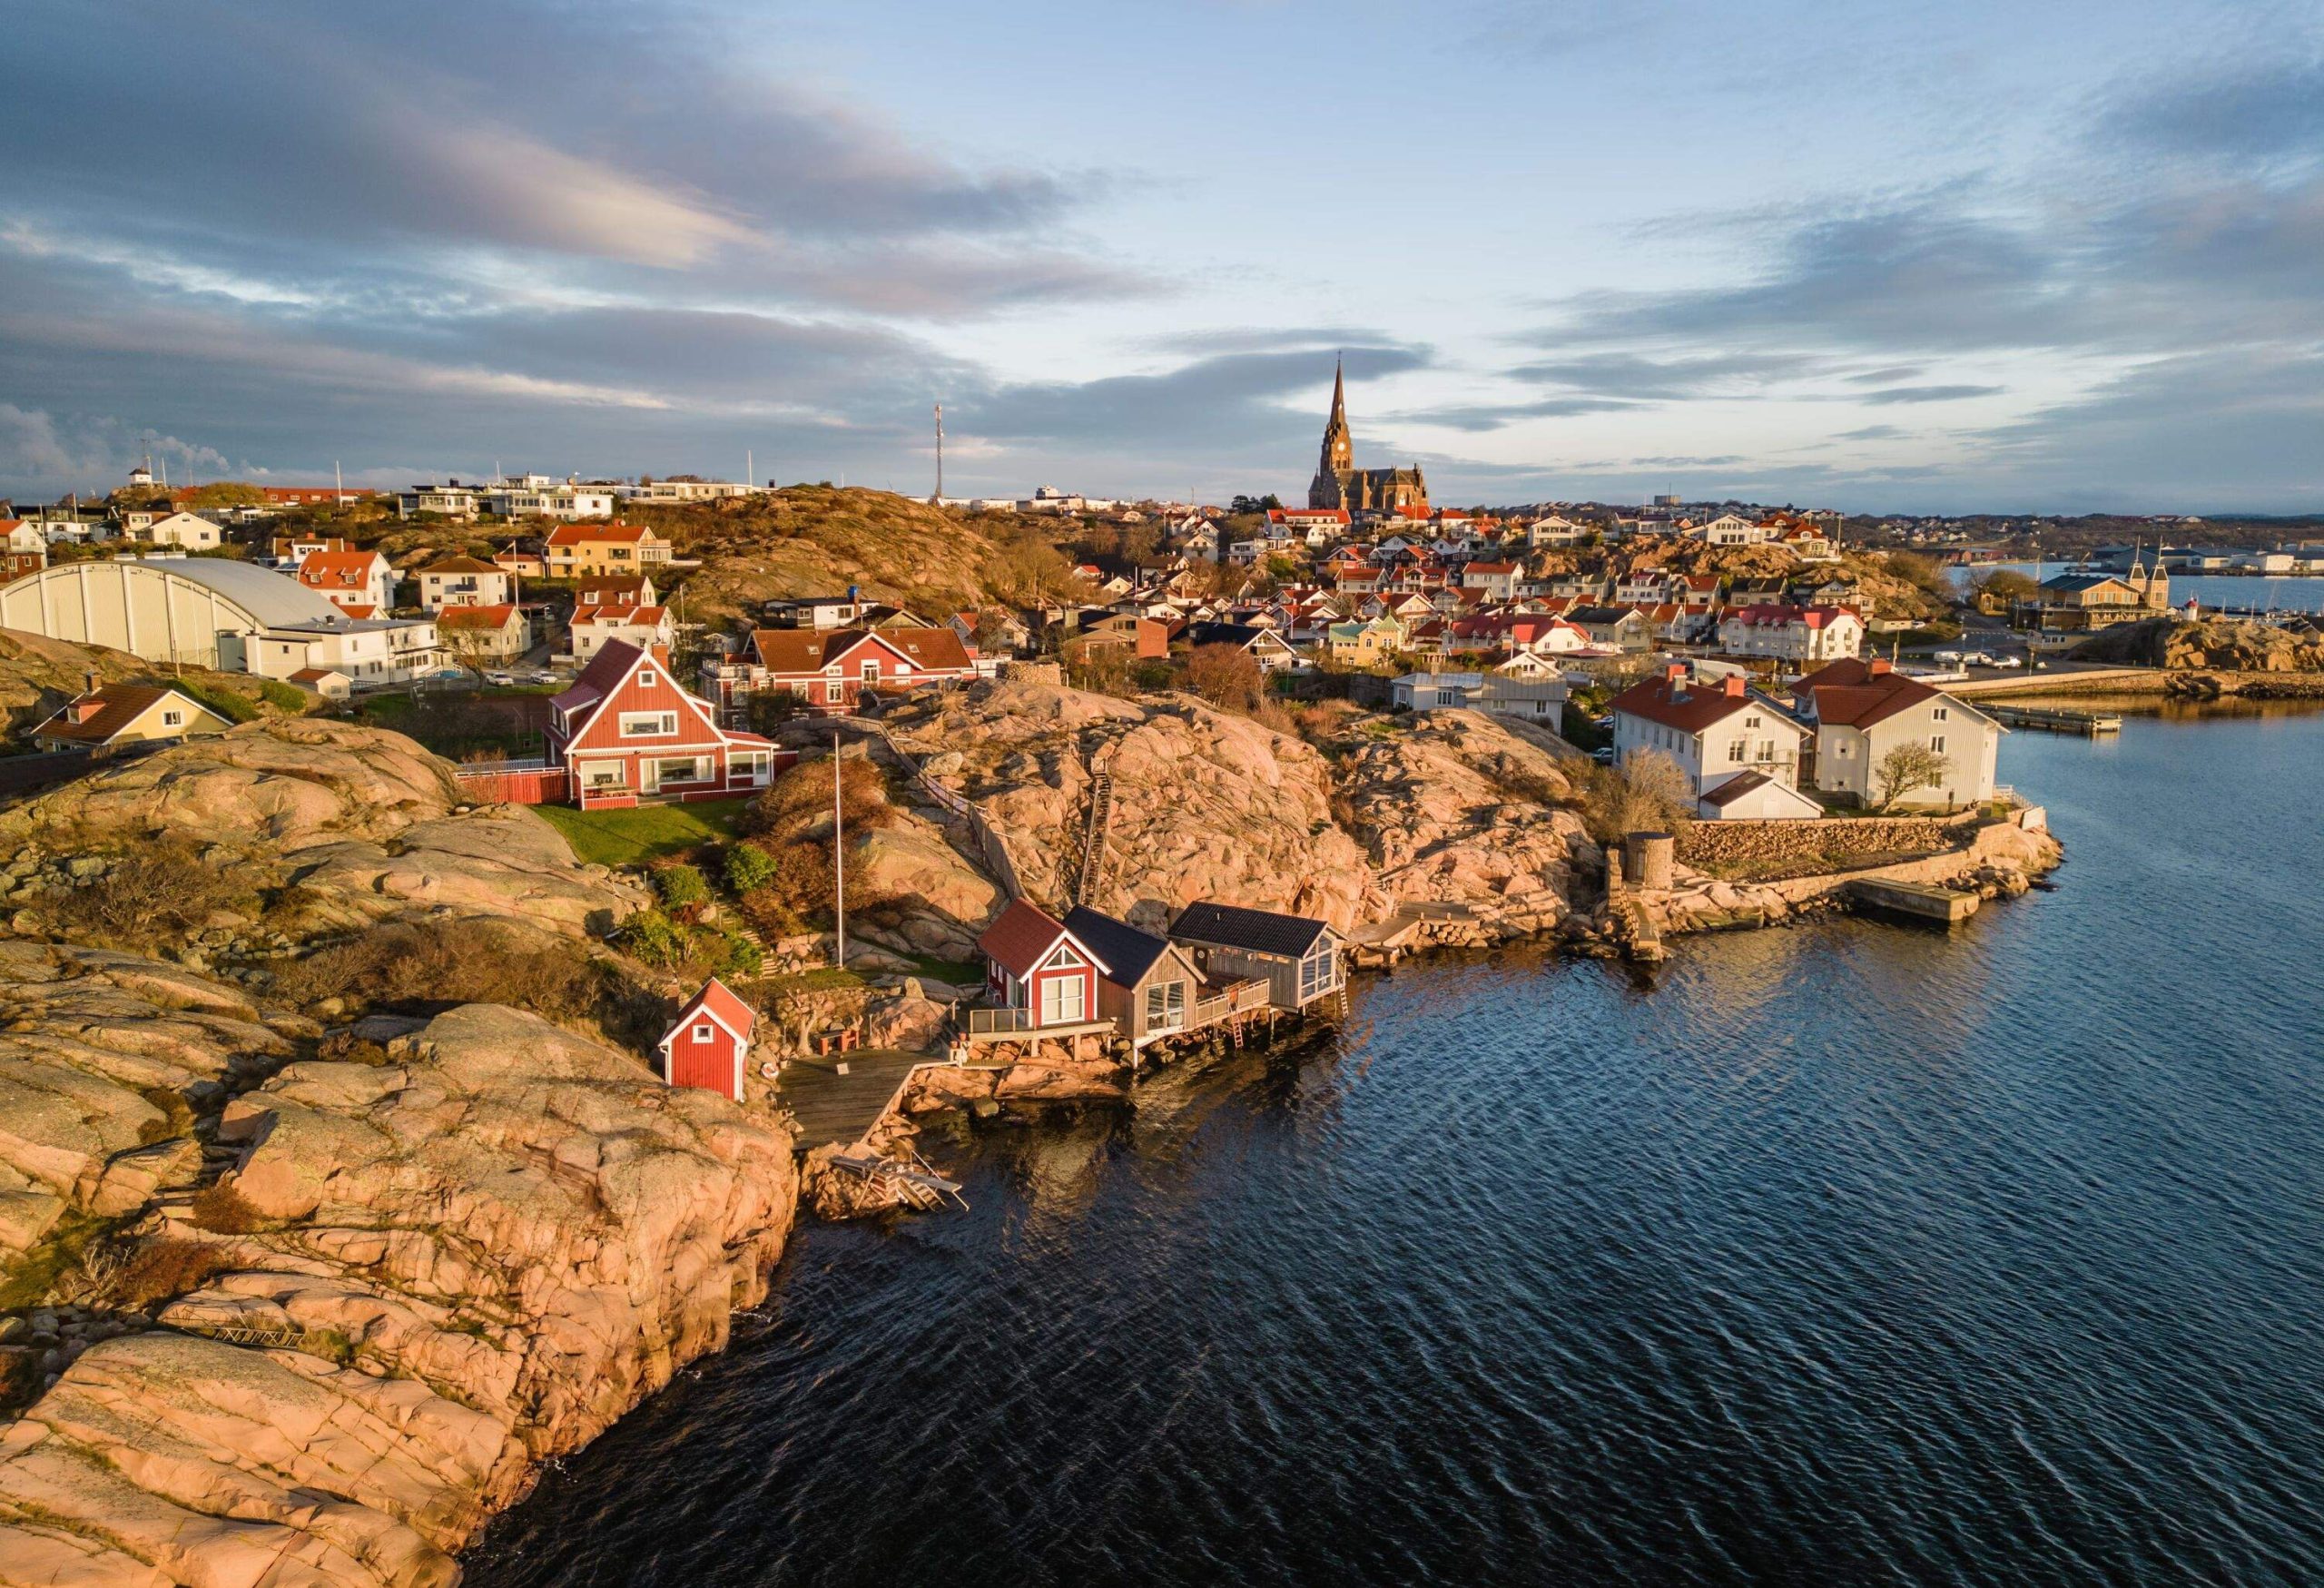 Sunset over the old town and coastline of Lysekil - Sweden